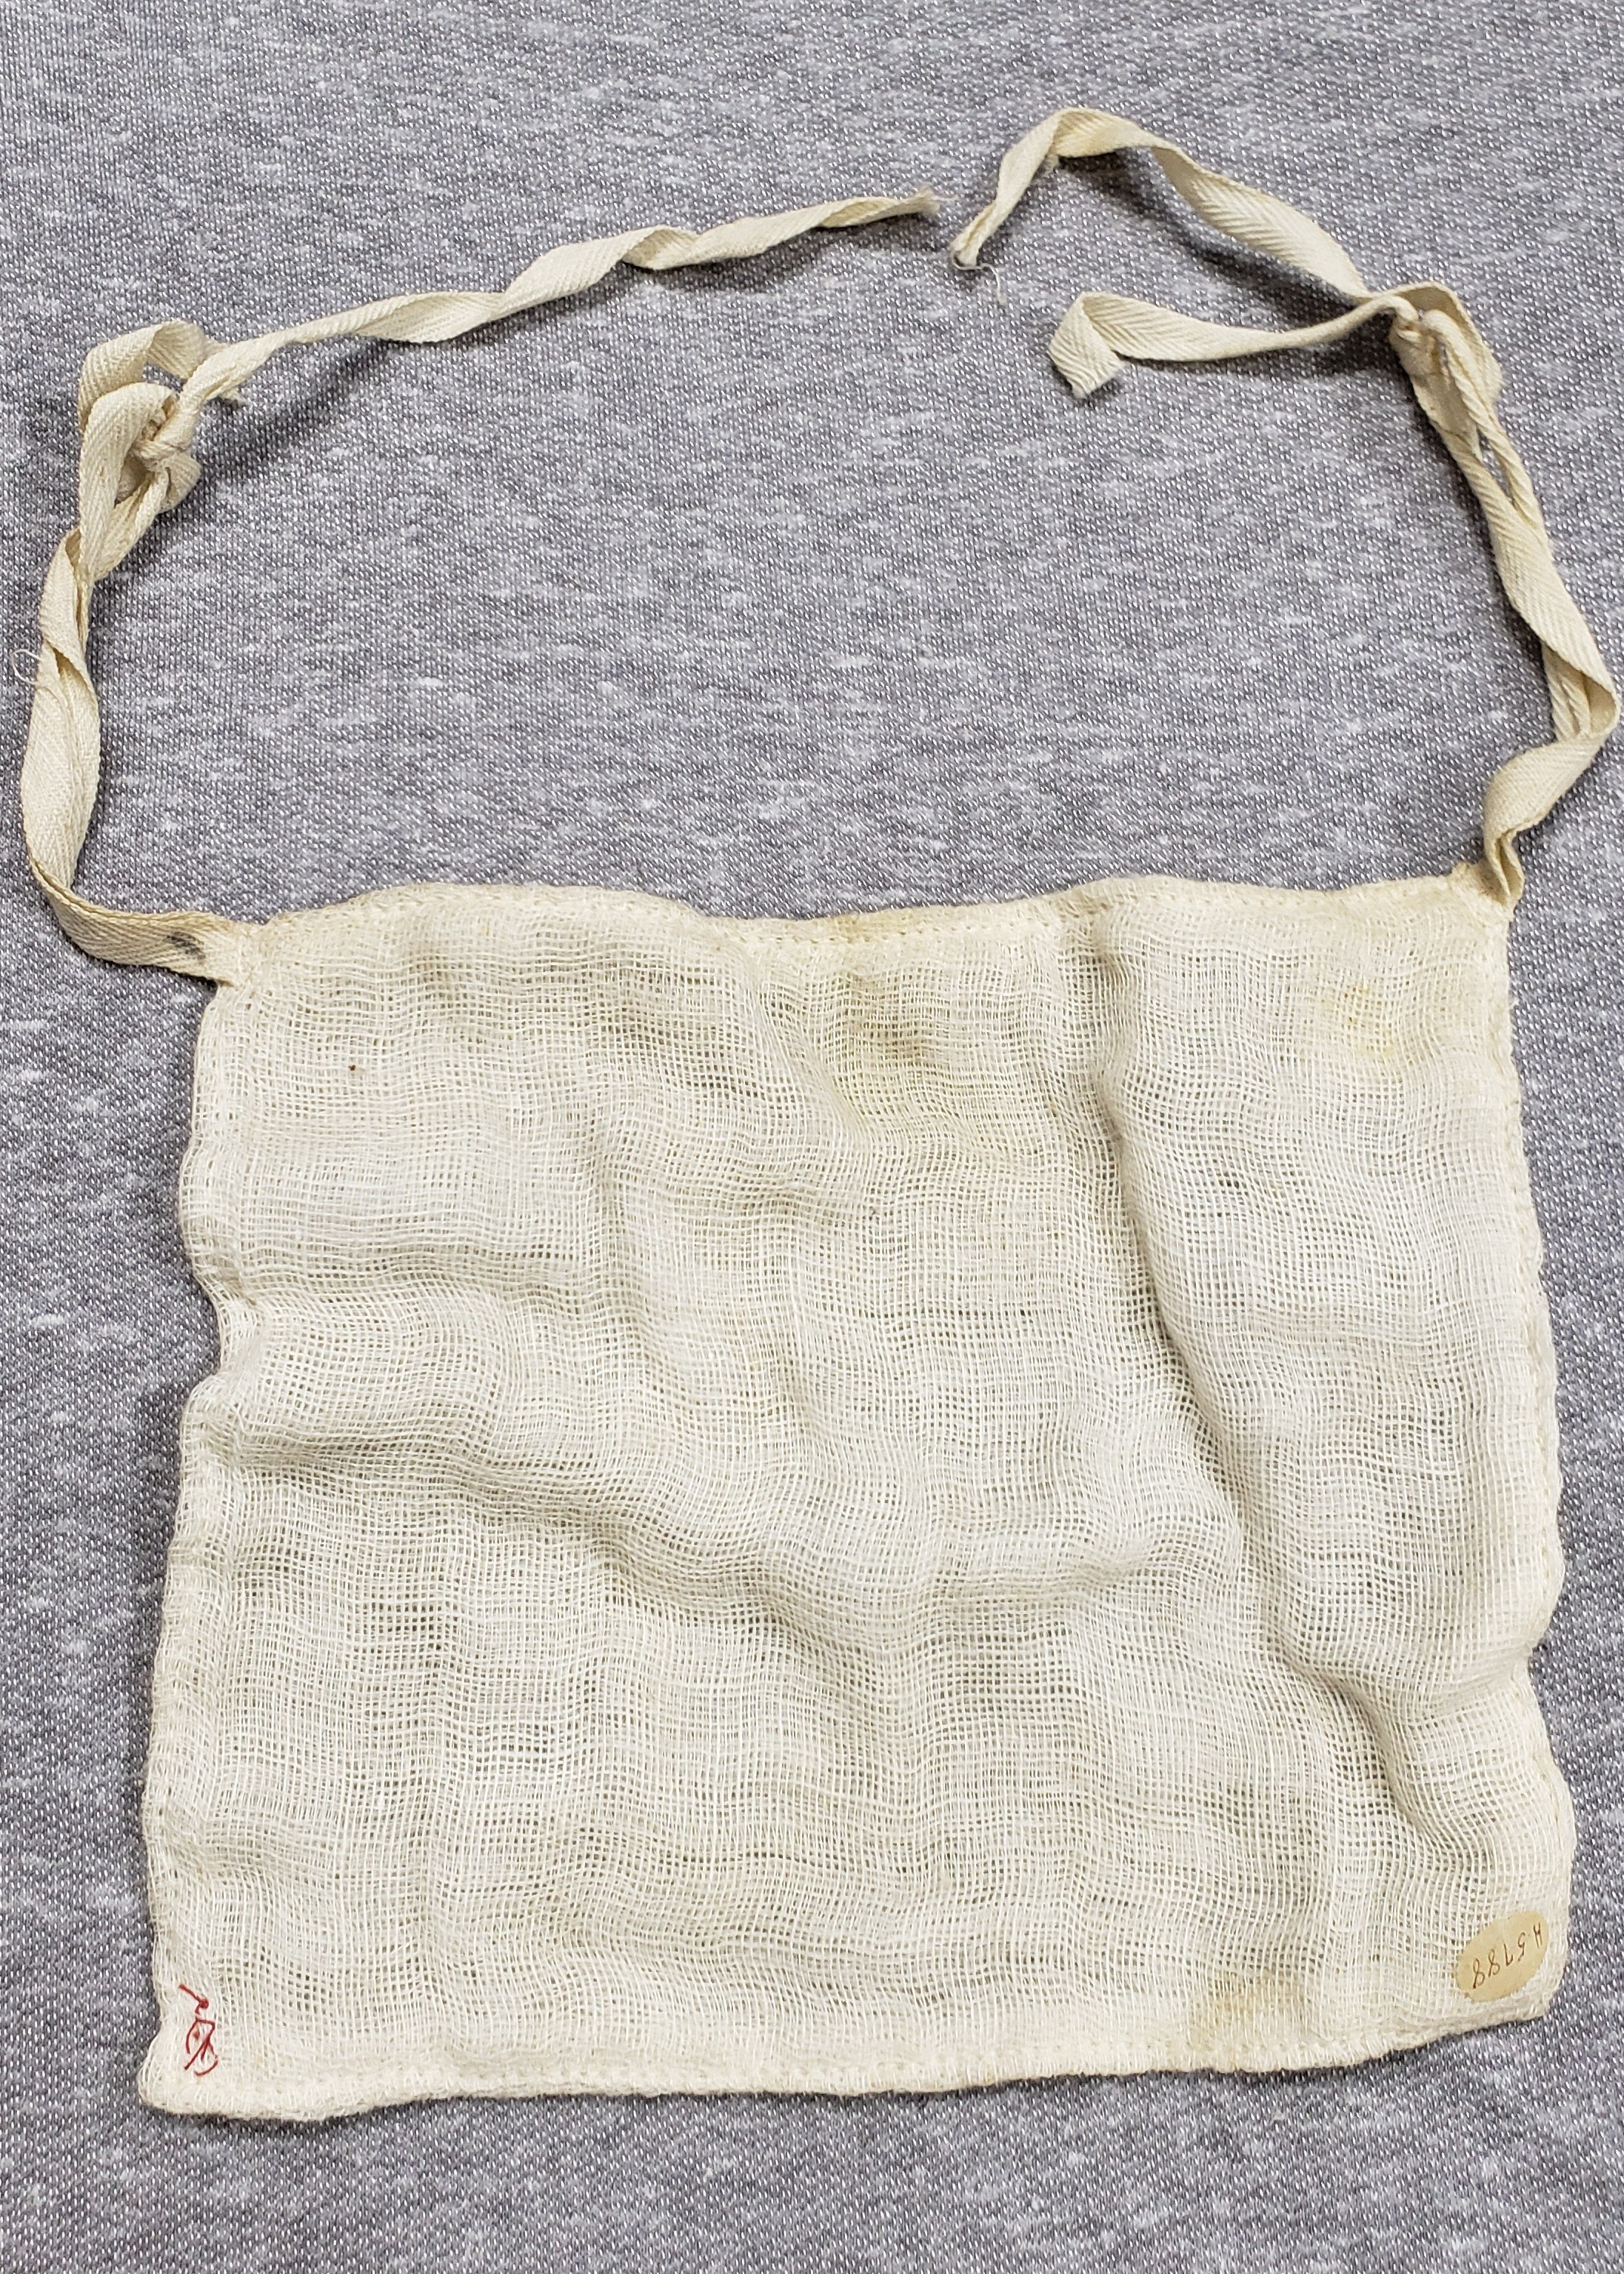 Gauze mask from 1918 Flu Pandemic, part of the Wisconsin Historical Society Collection